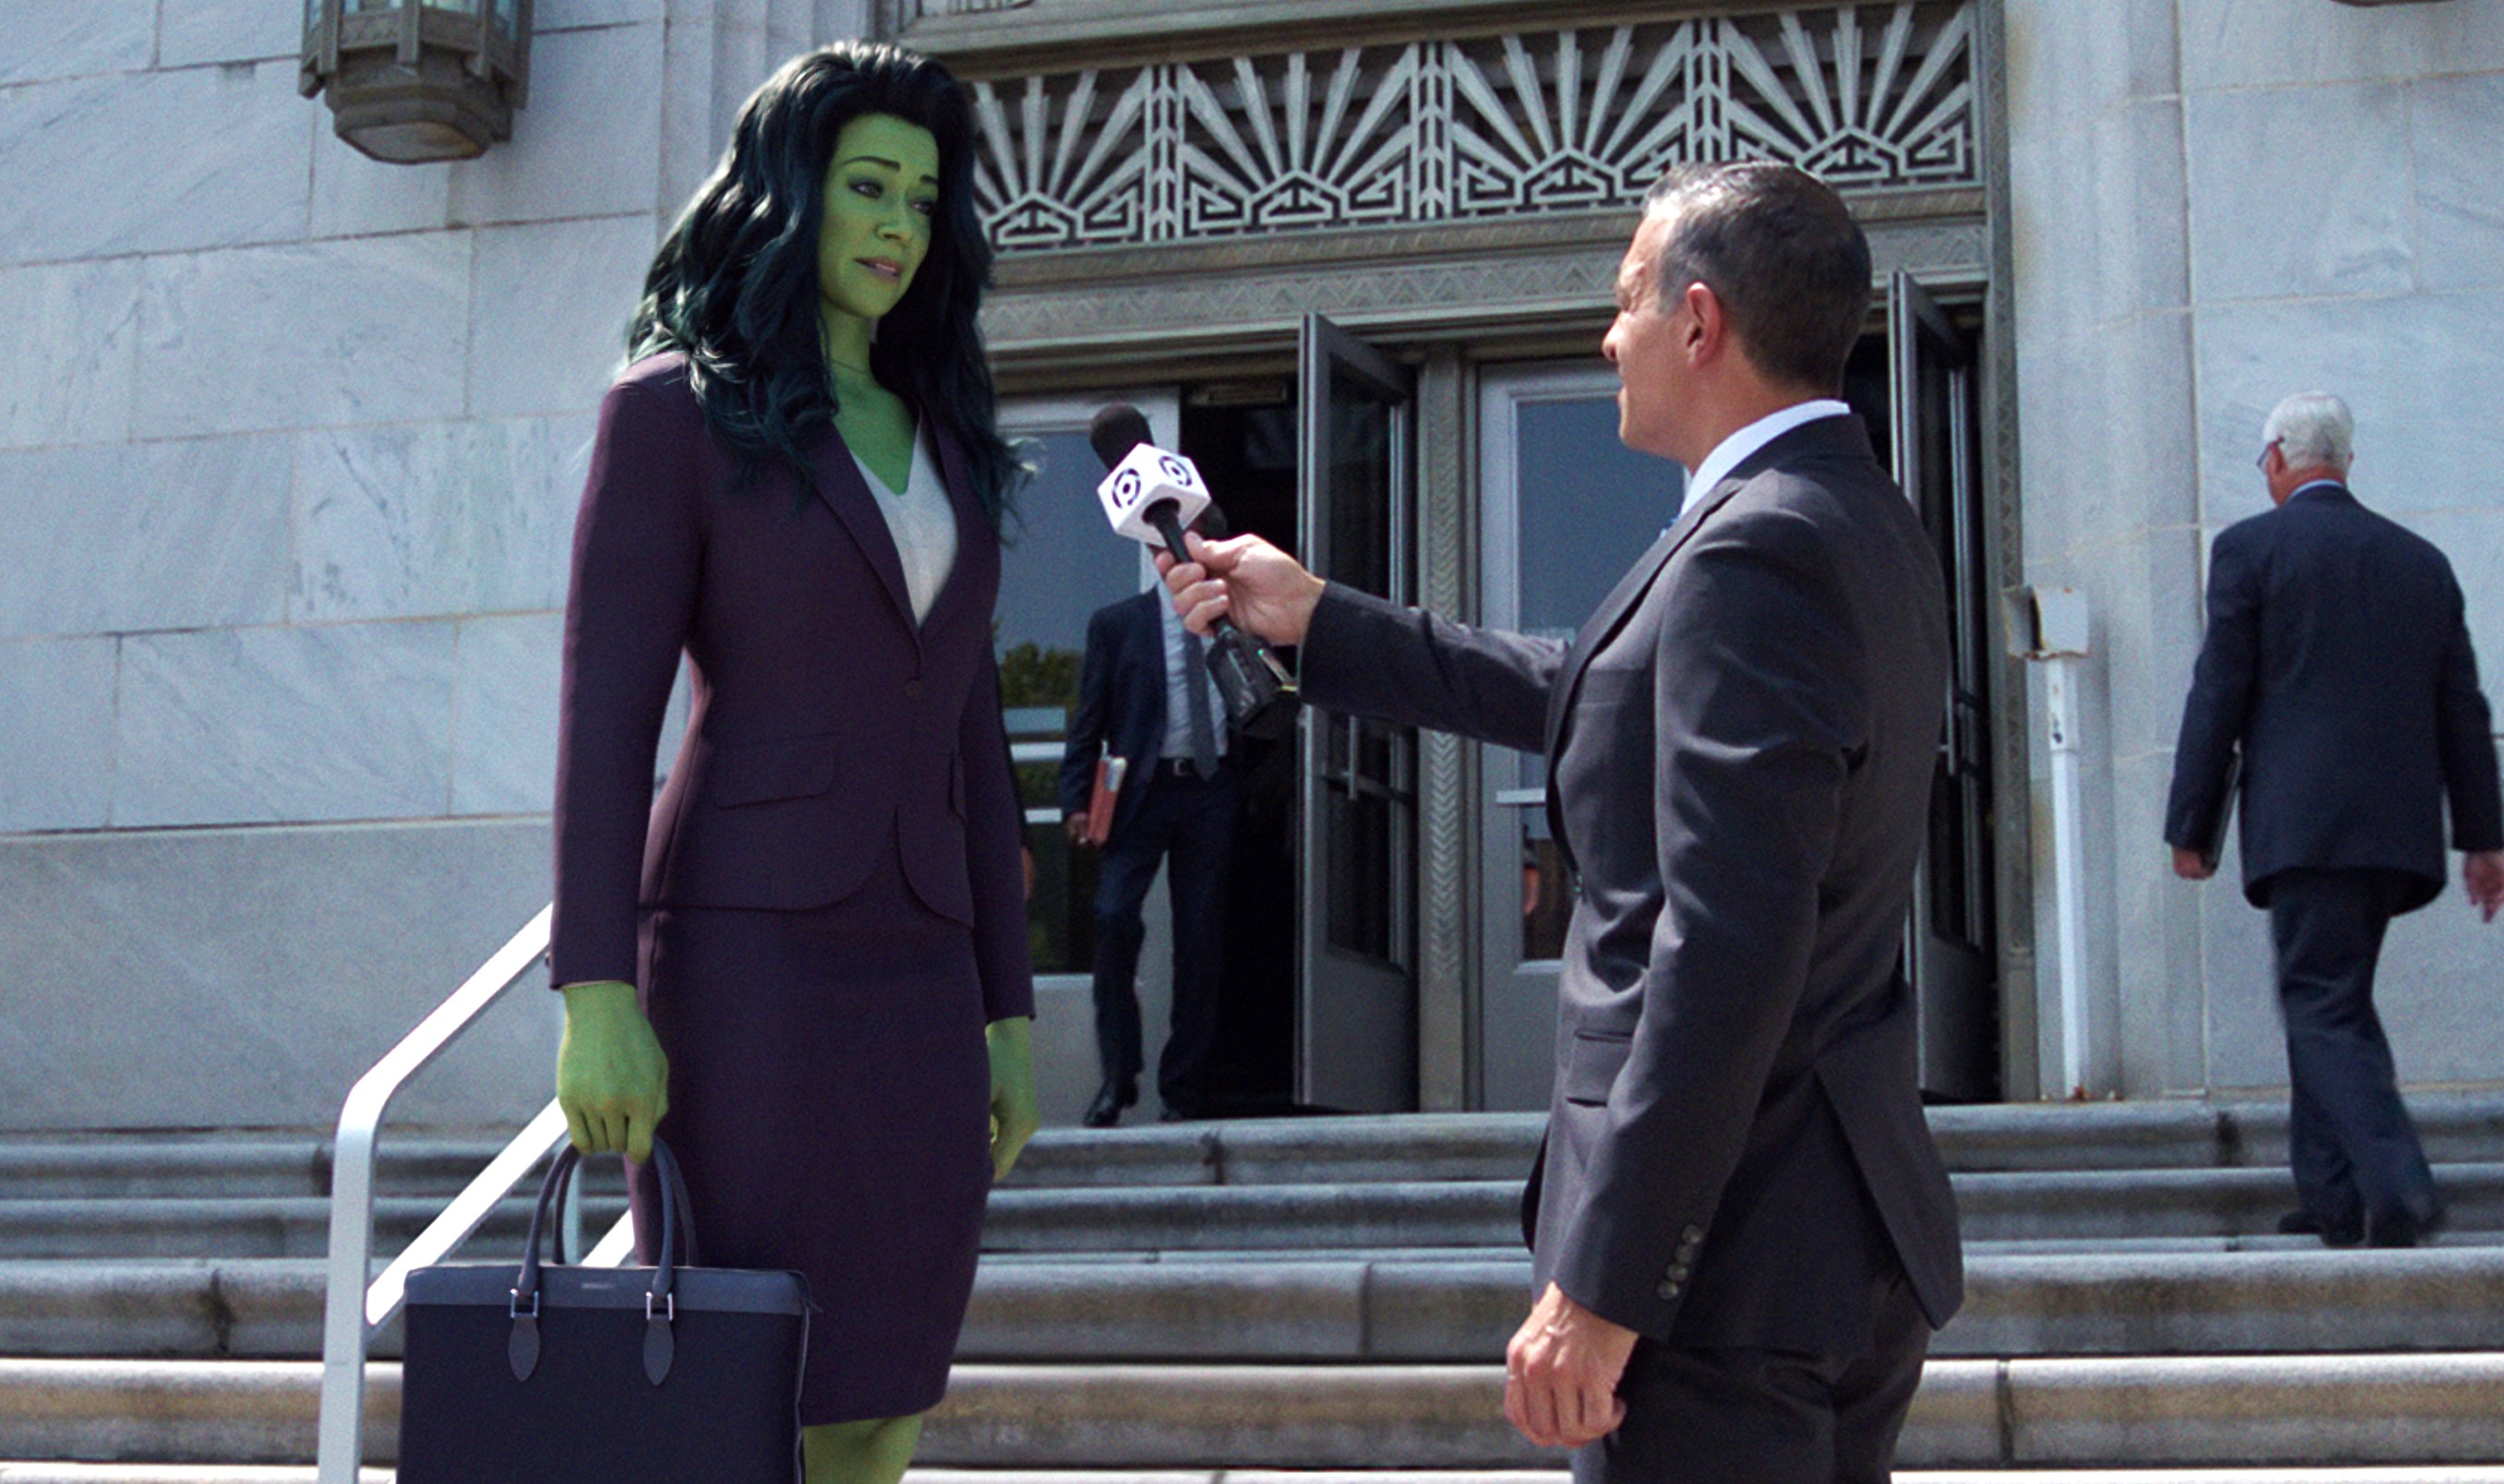 Marvel Drops Clearest Look Yet at She-Hulk's Battle Suit